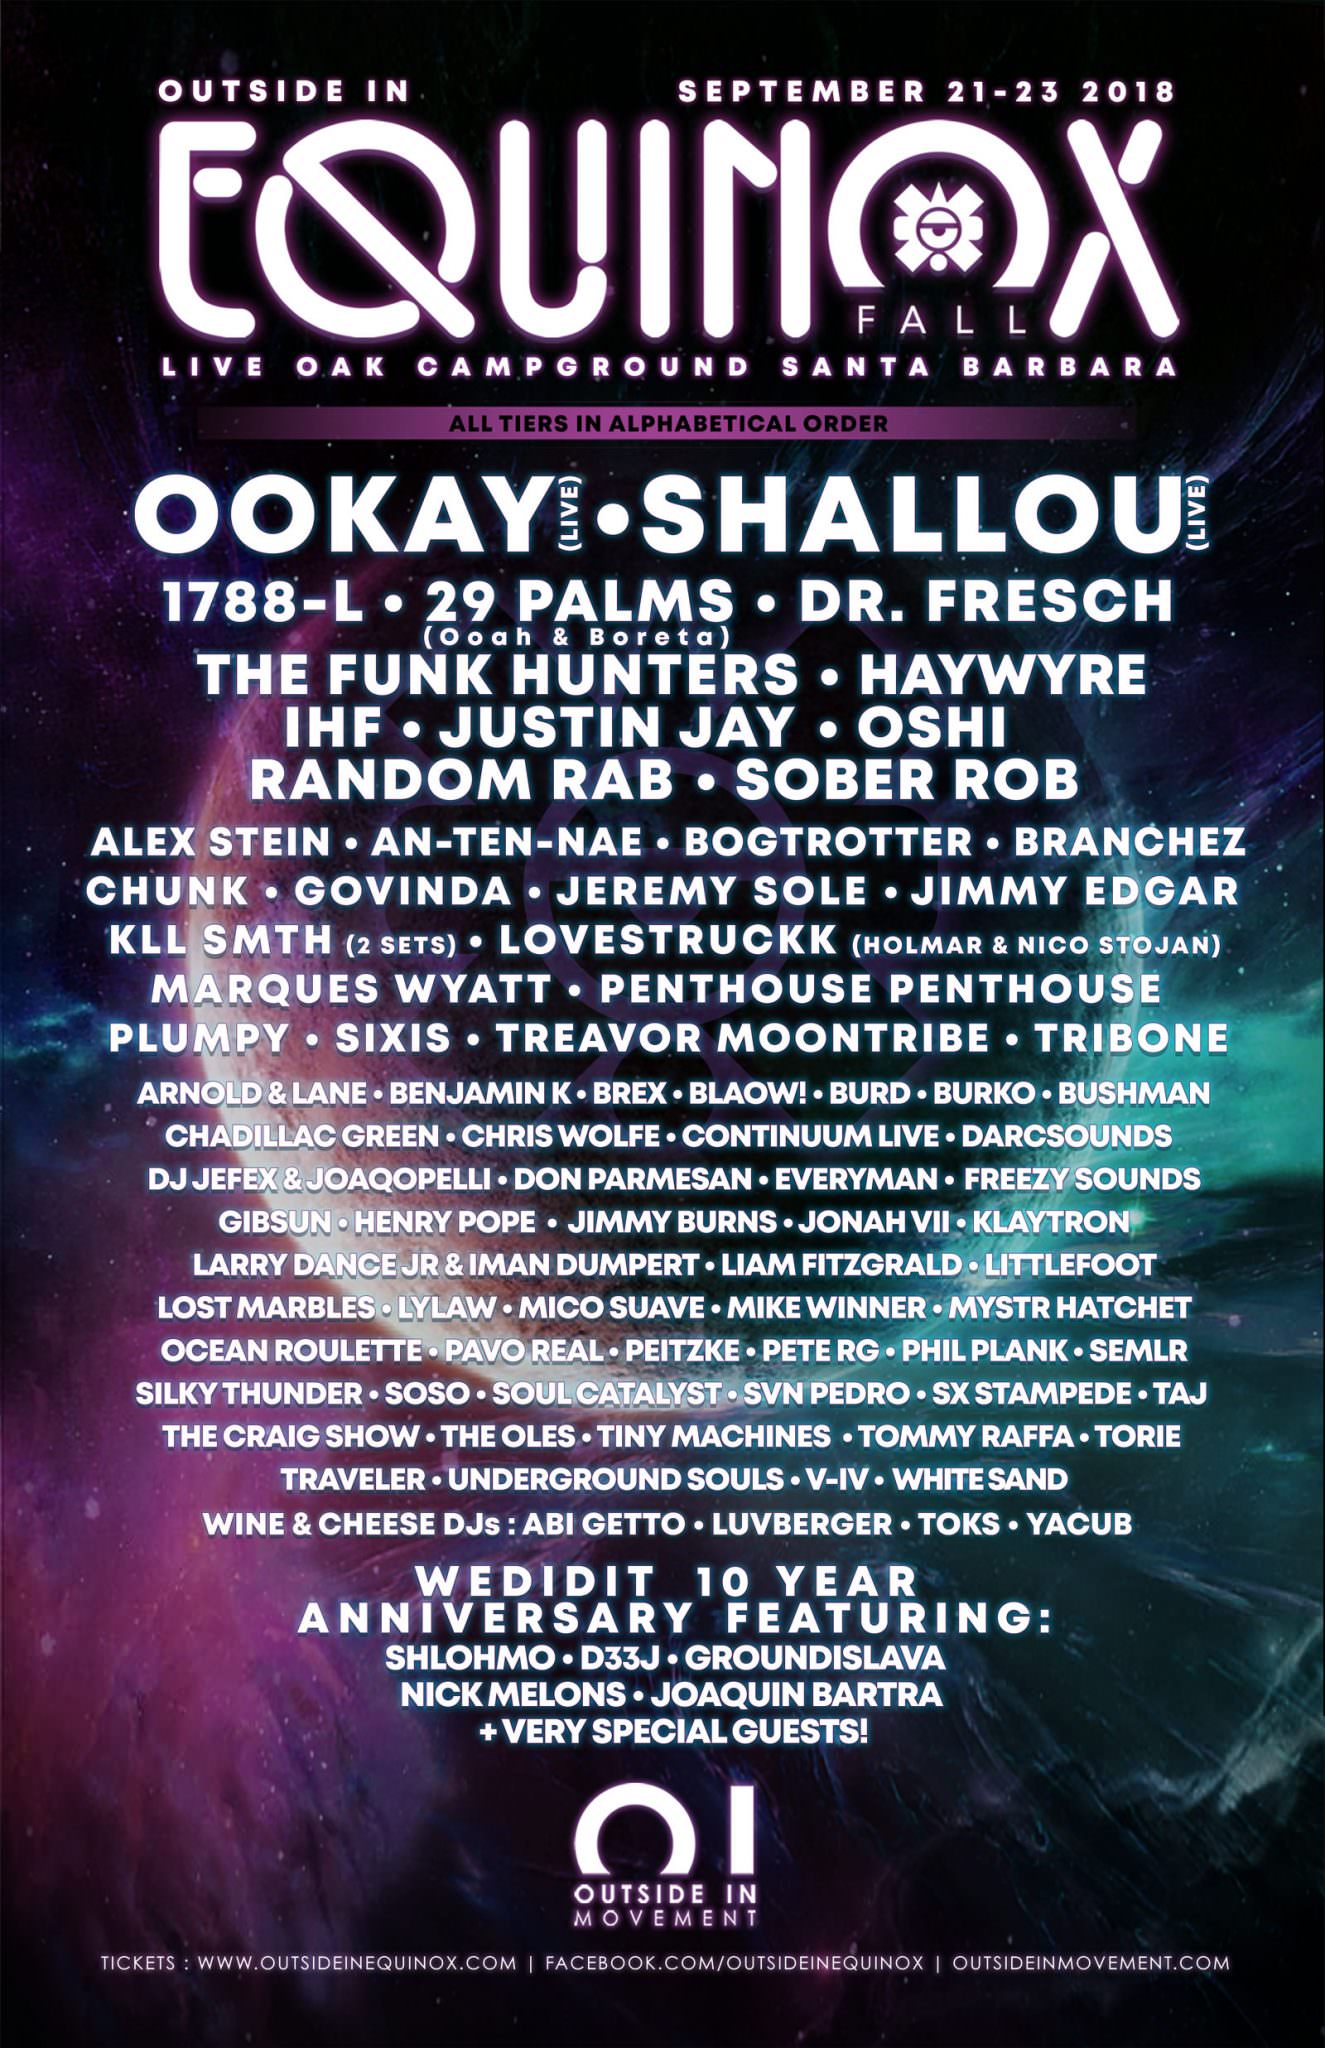 Outside In Equinox Festival Celebrates the Fall with Full Lineup